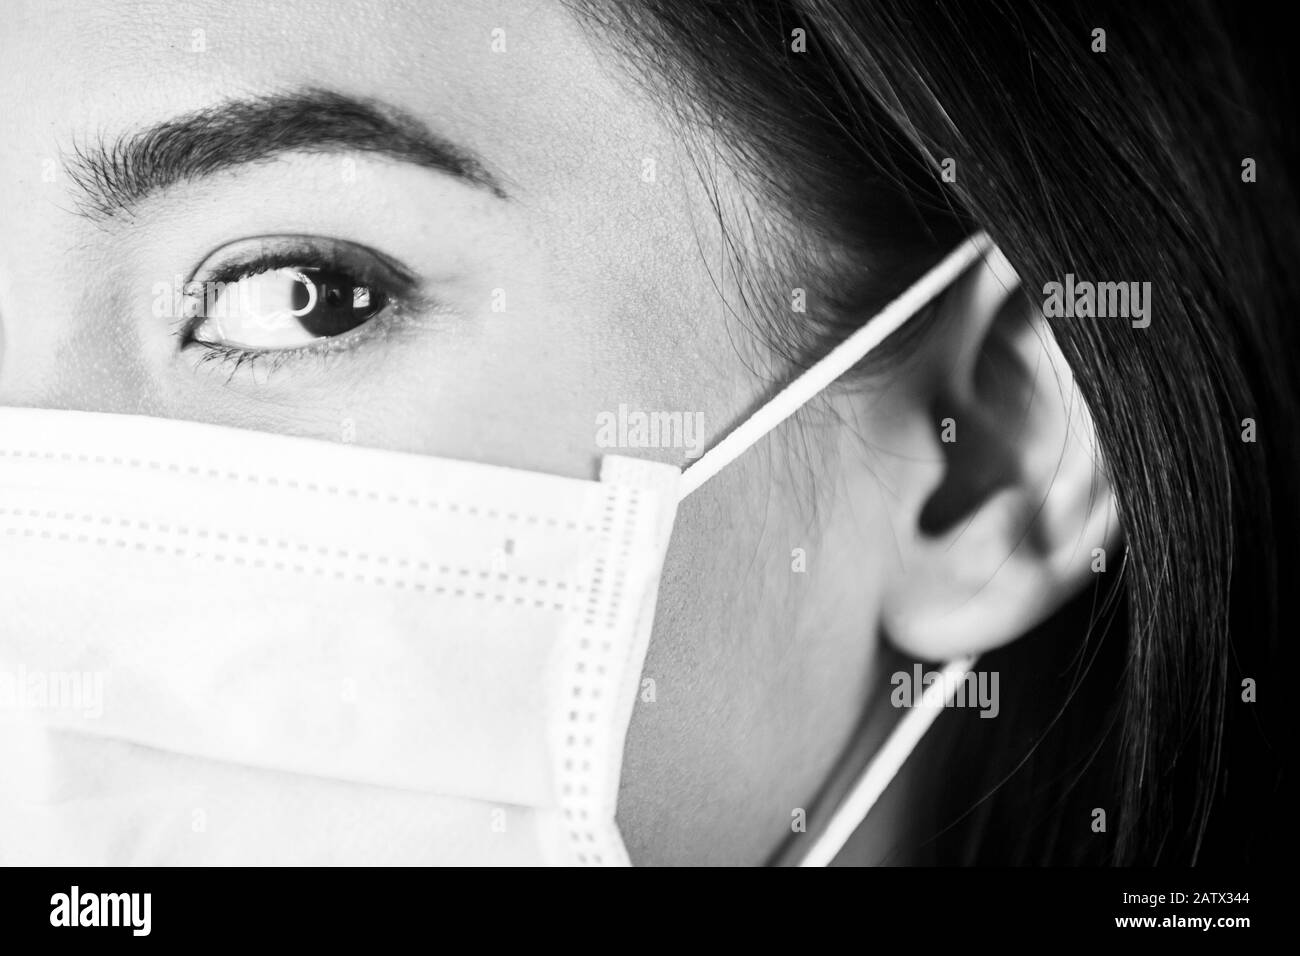 Portrait of a woman wearing medical face mask to protect the upper respiratory tract. Stock Photo